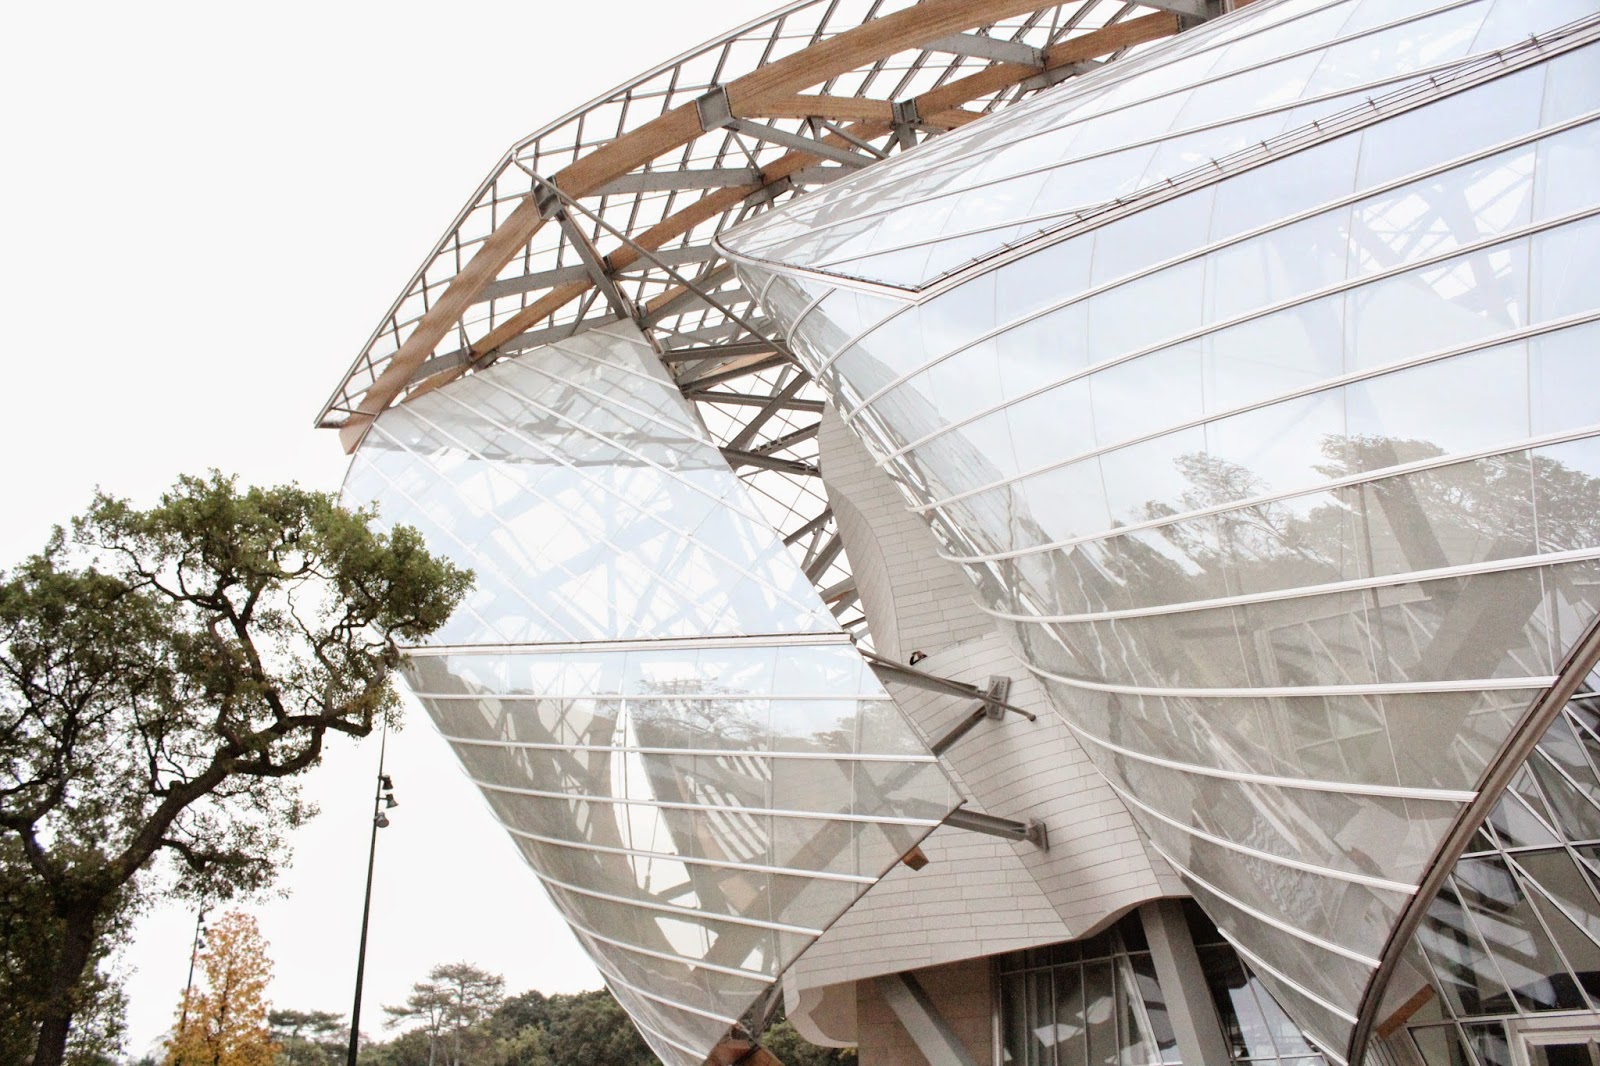 Chasing the Extraordinary: Louis Vuitton Foundation for Creation